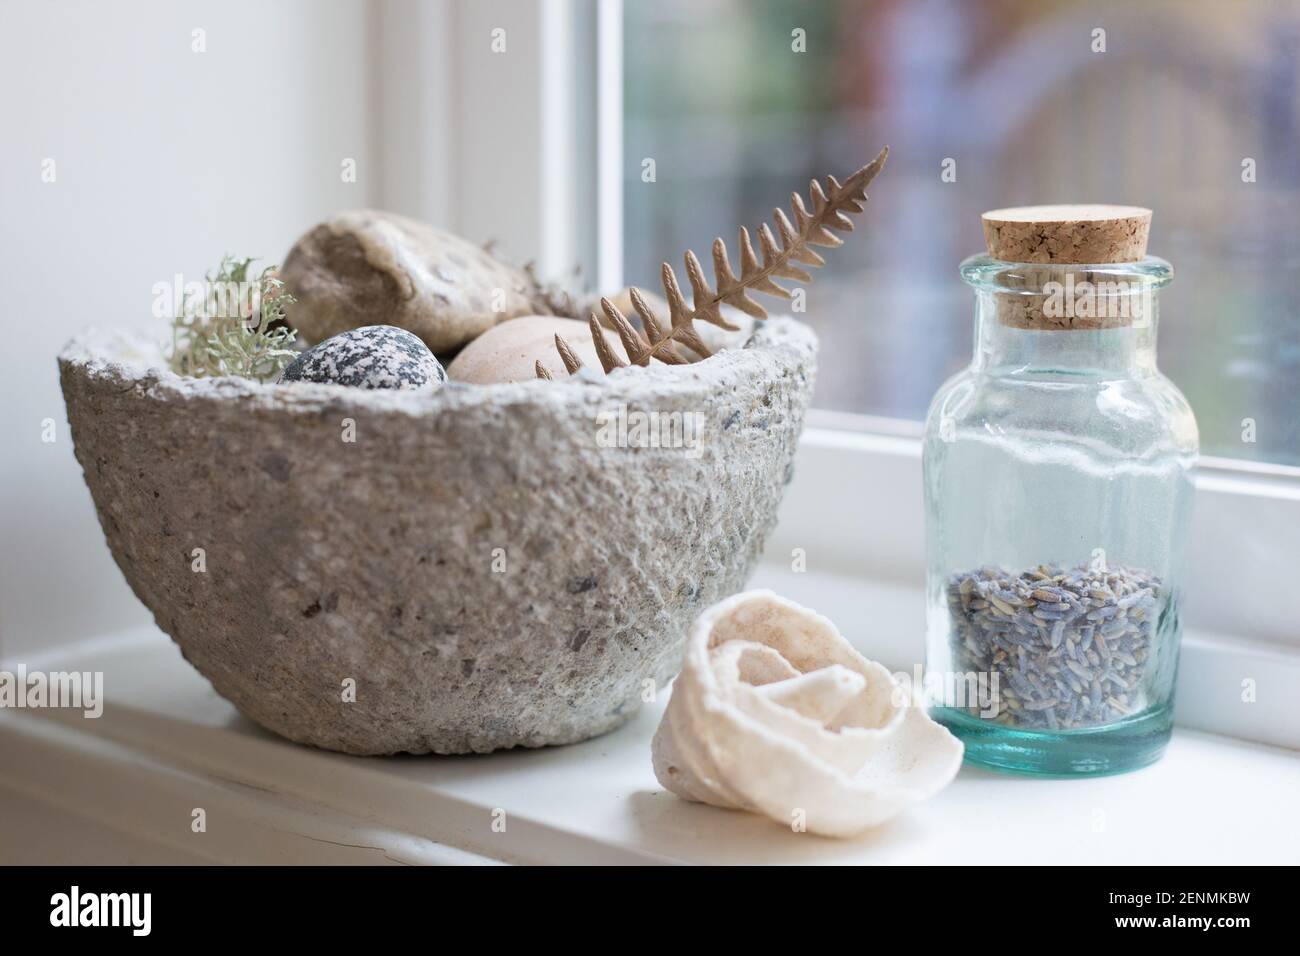 Still life of natural objects on a windowsill. Stock Photo